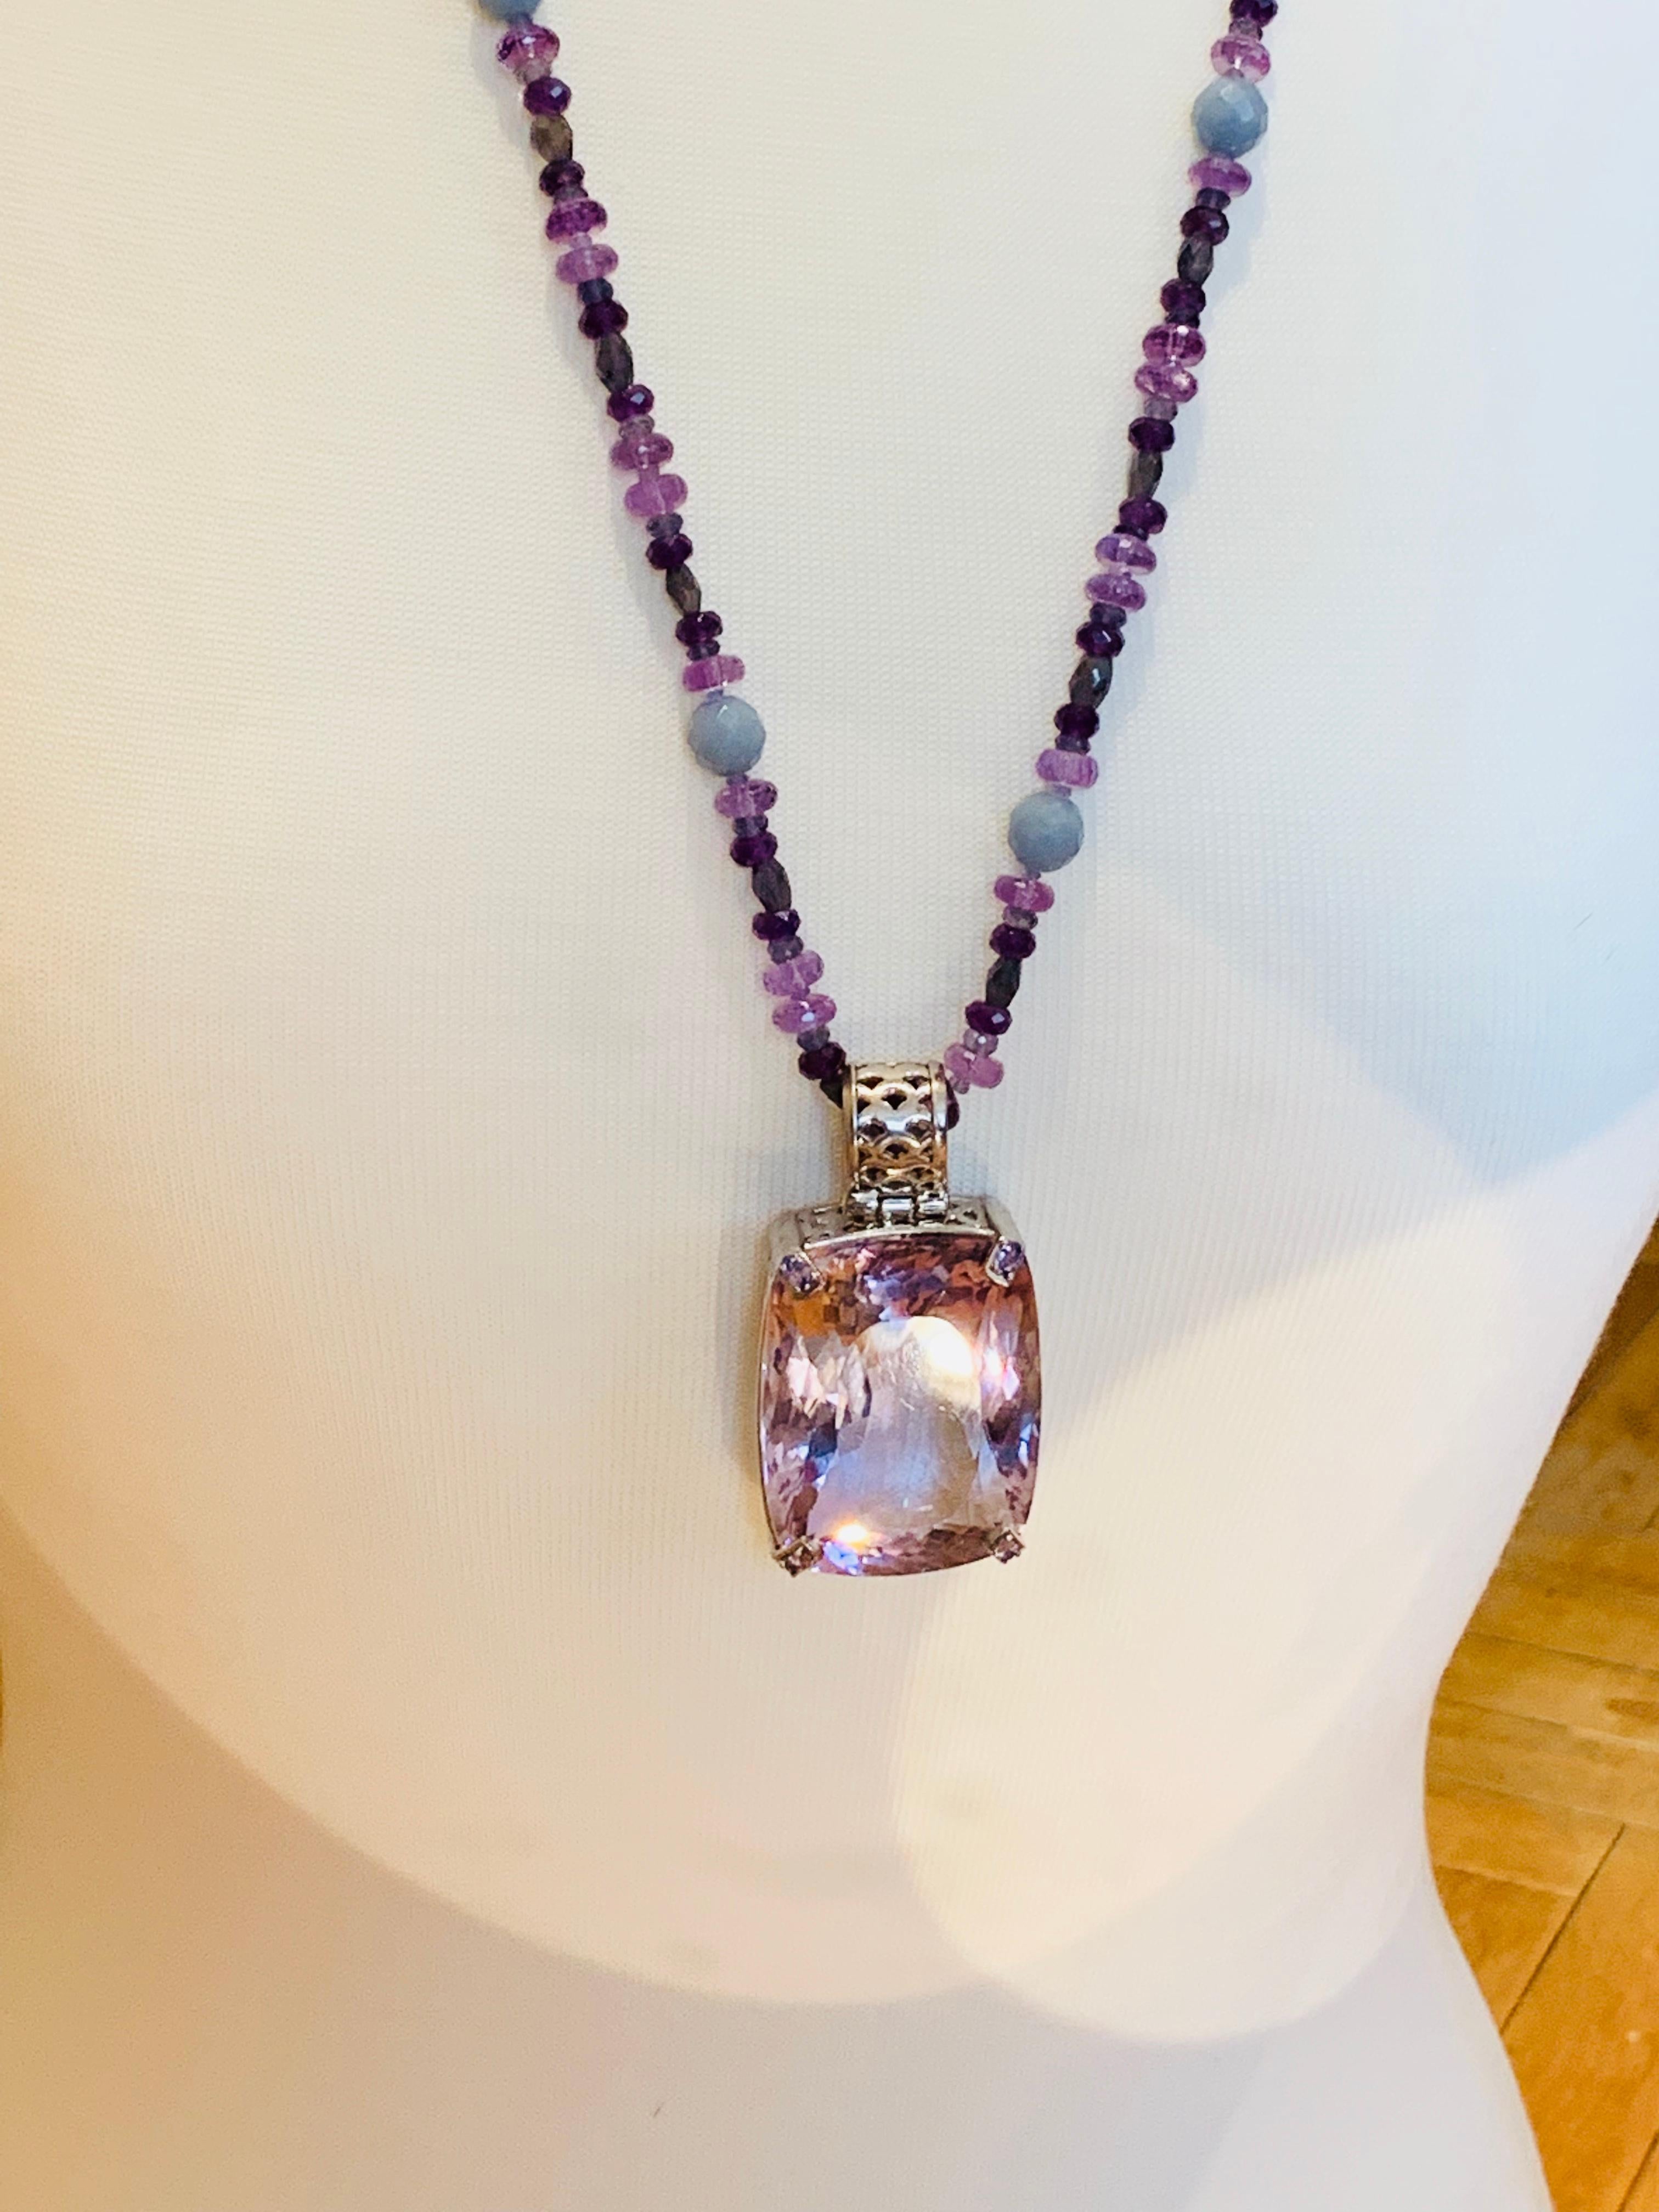 Modern 257.55 Carat Natural Brazilian Amethyst with Tanzanite Pendant Necklace For Sale